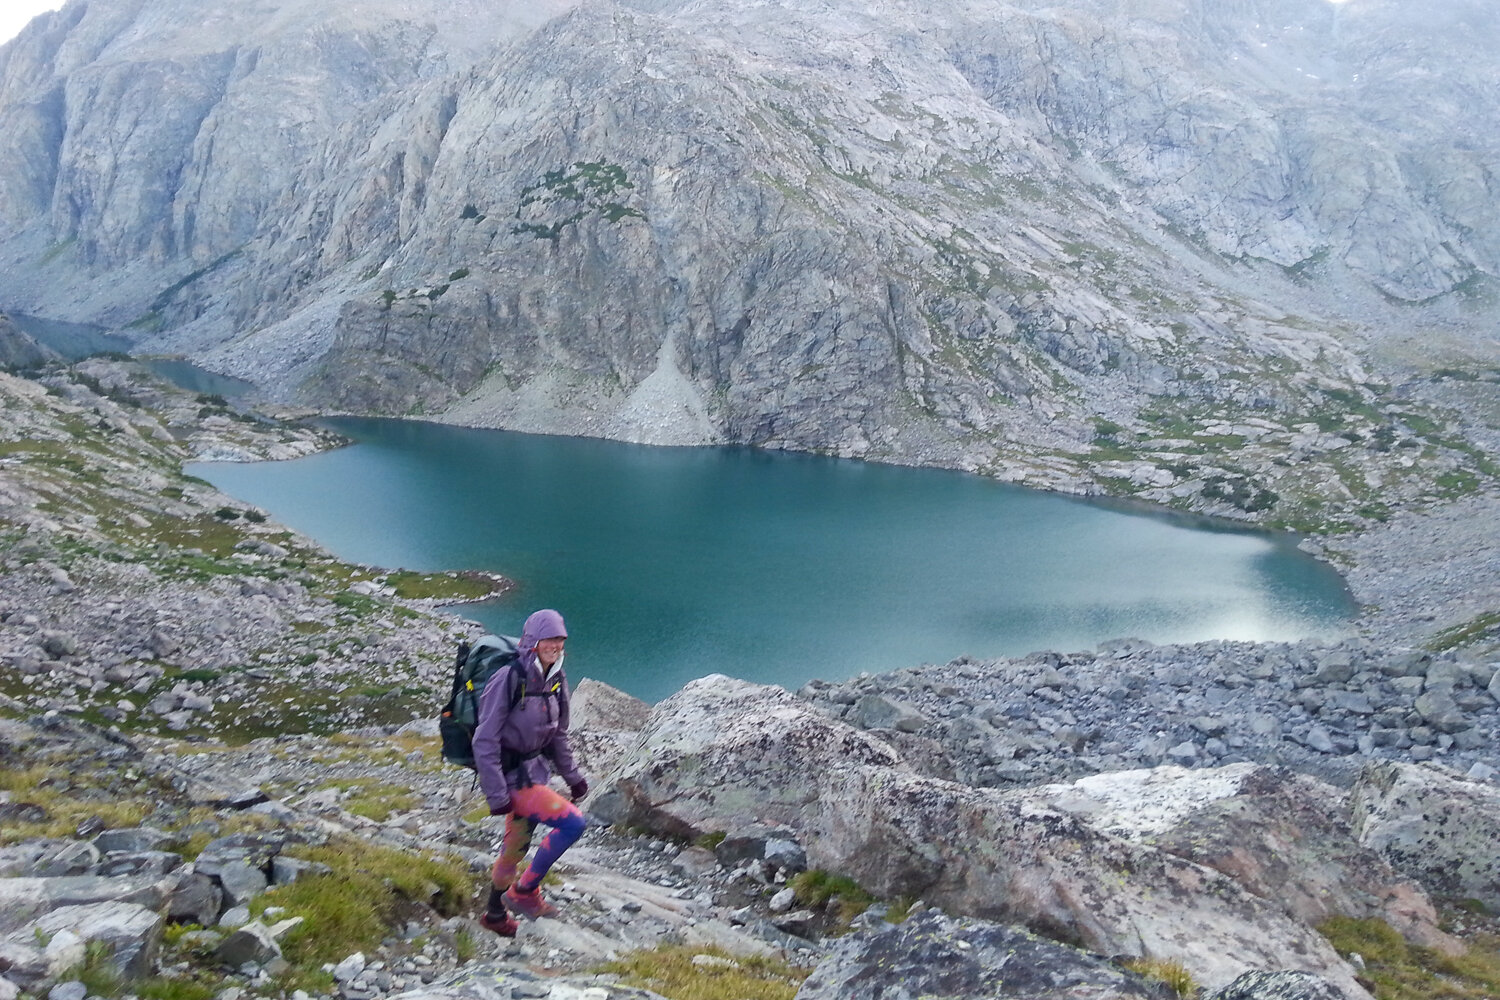 Hiking through the Jaw-dropping Wind River Range